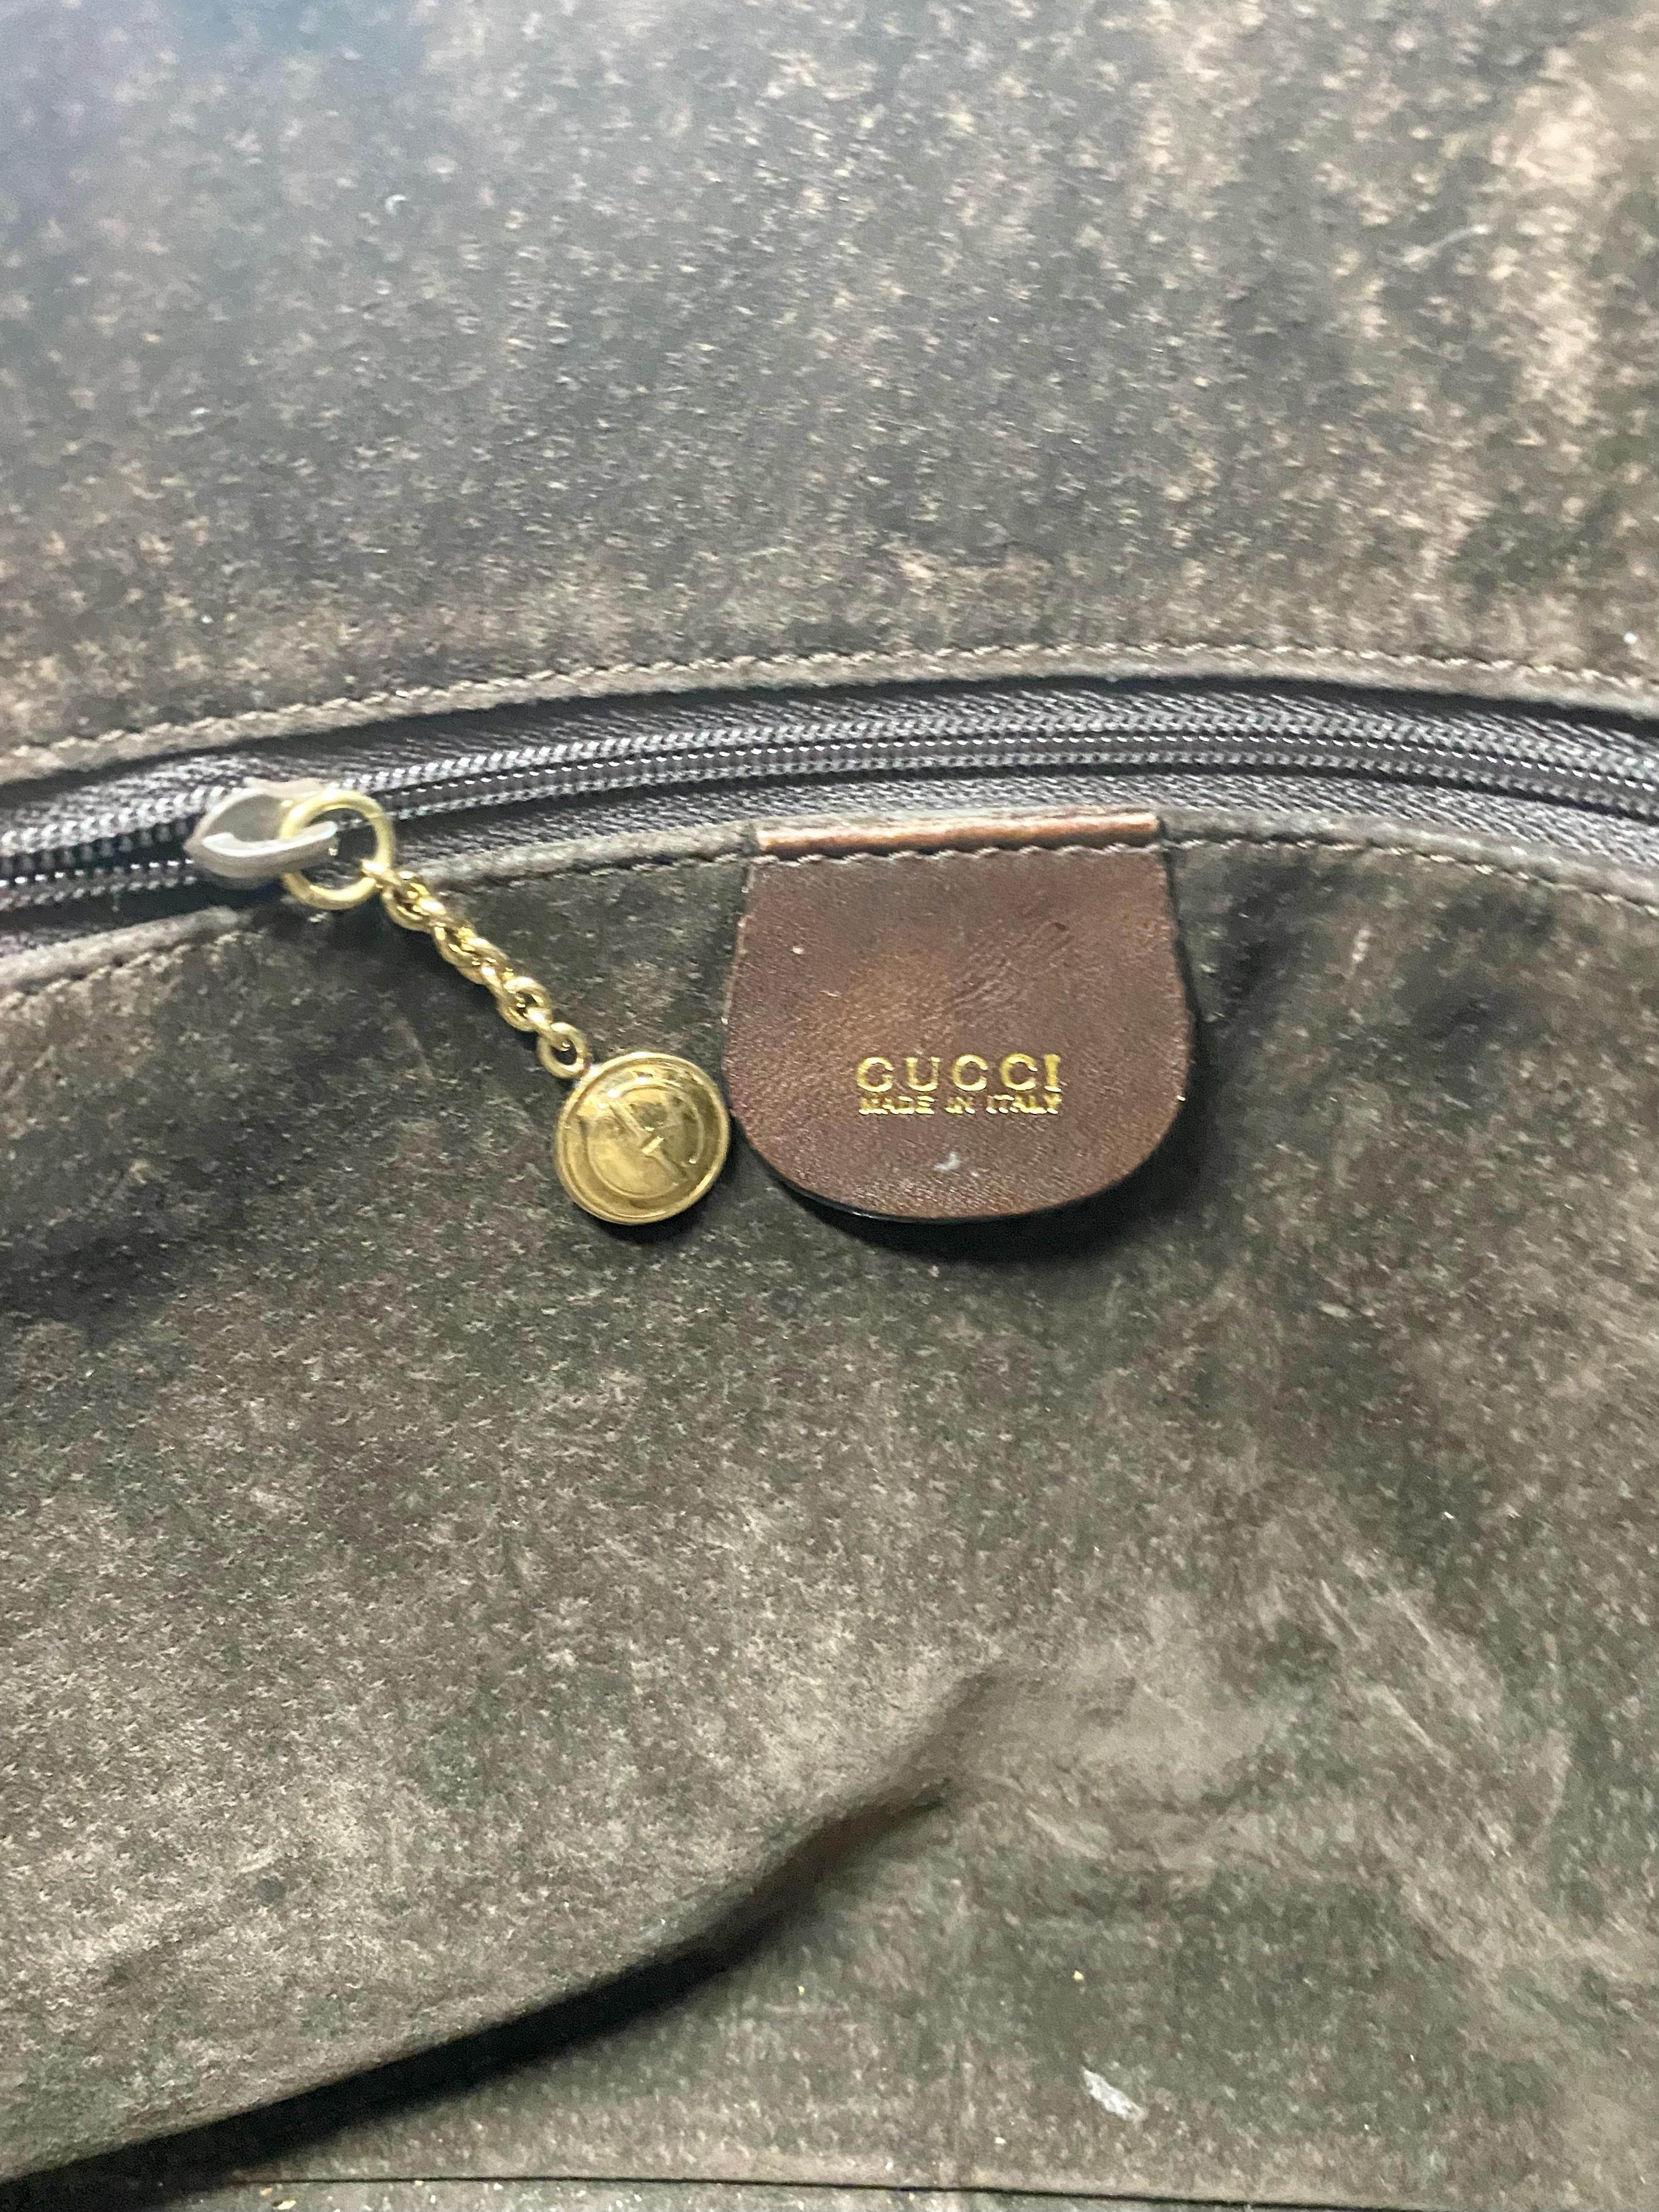 S/S 1997 Gucci by Tom Ford Woven Brown Leather Hobo Bamboo Bag with Strap  In Good Condition For Sale In West Hollywood, CA